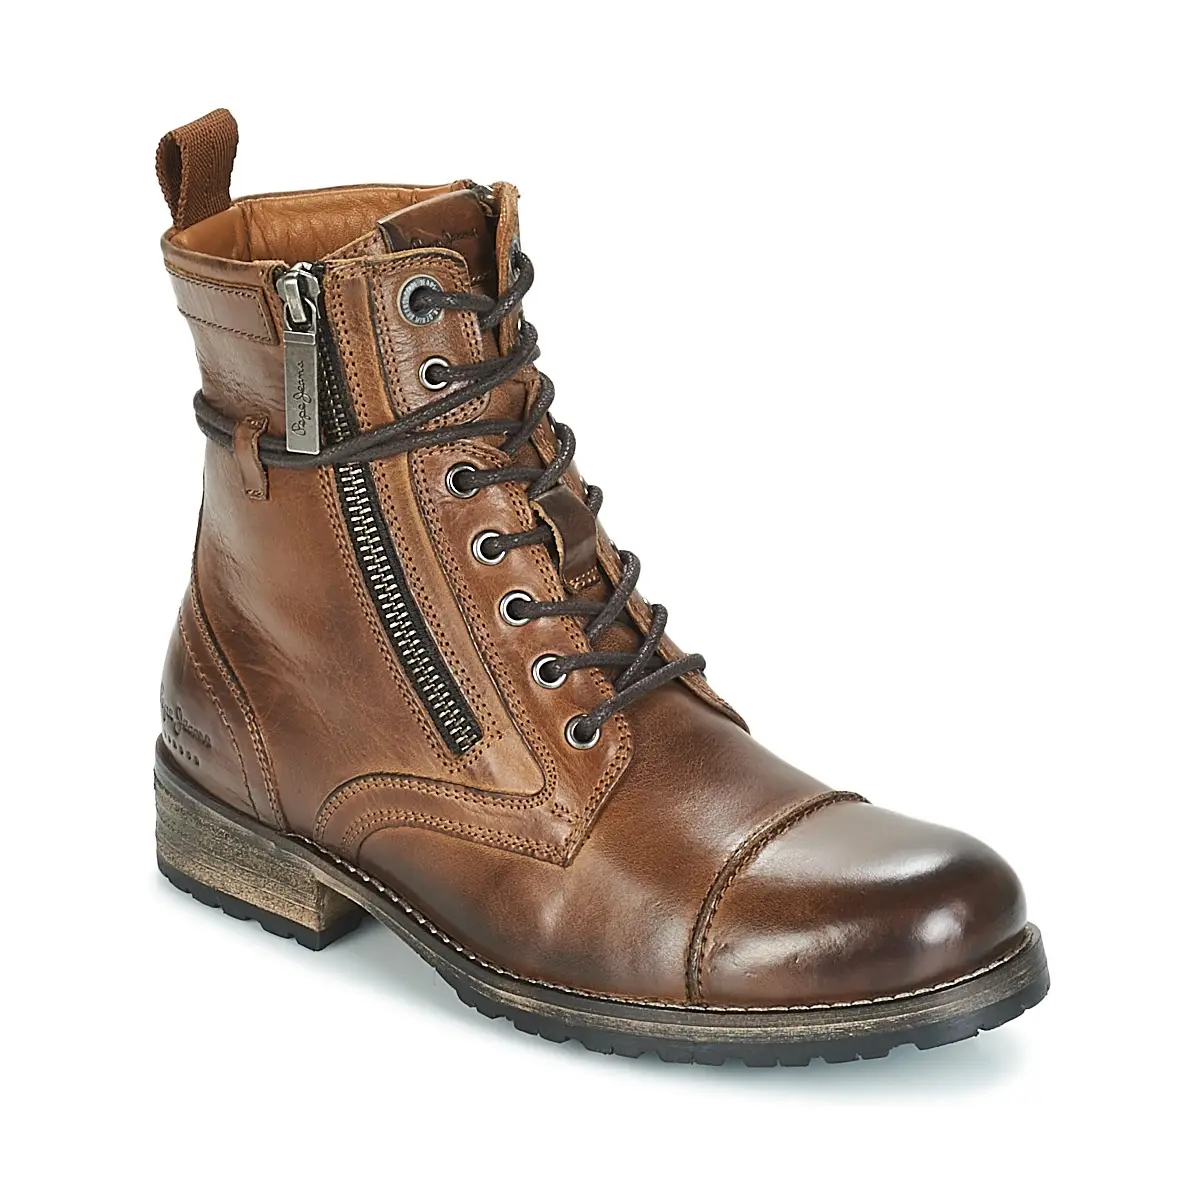 Pepe jeans Melting Boots Marron